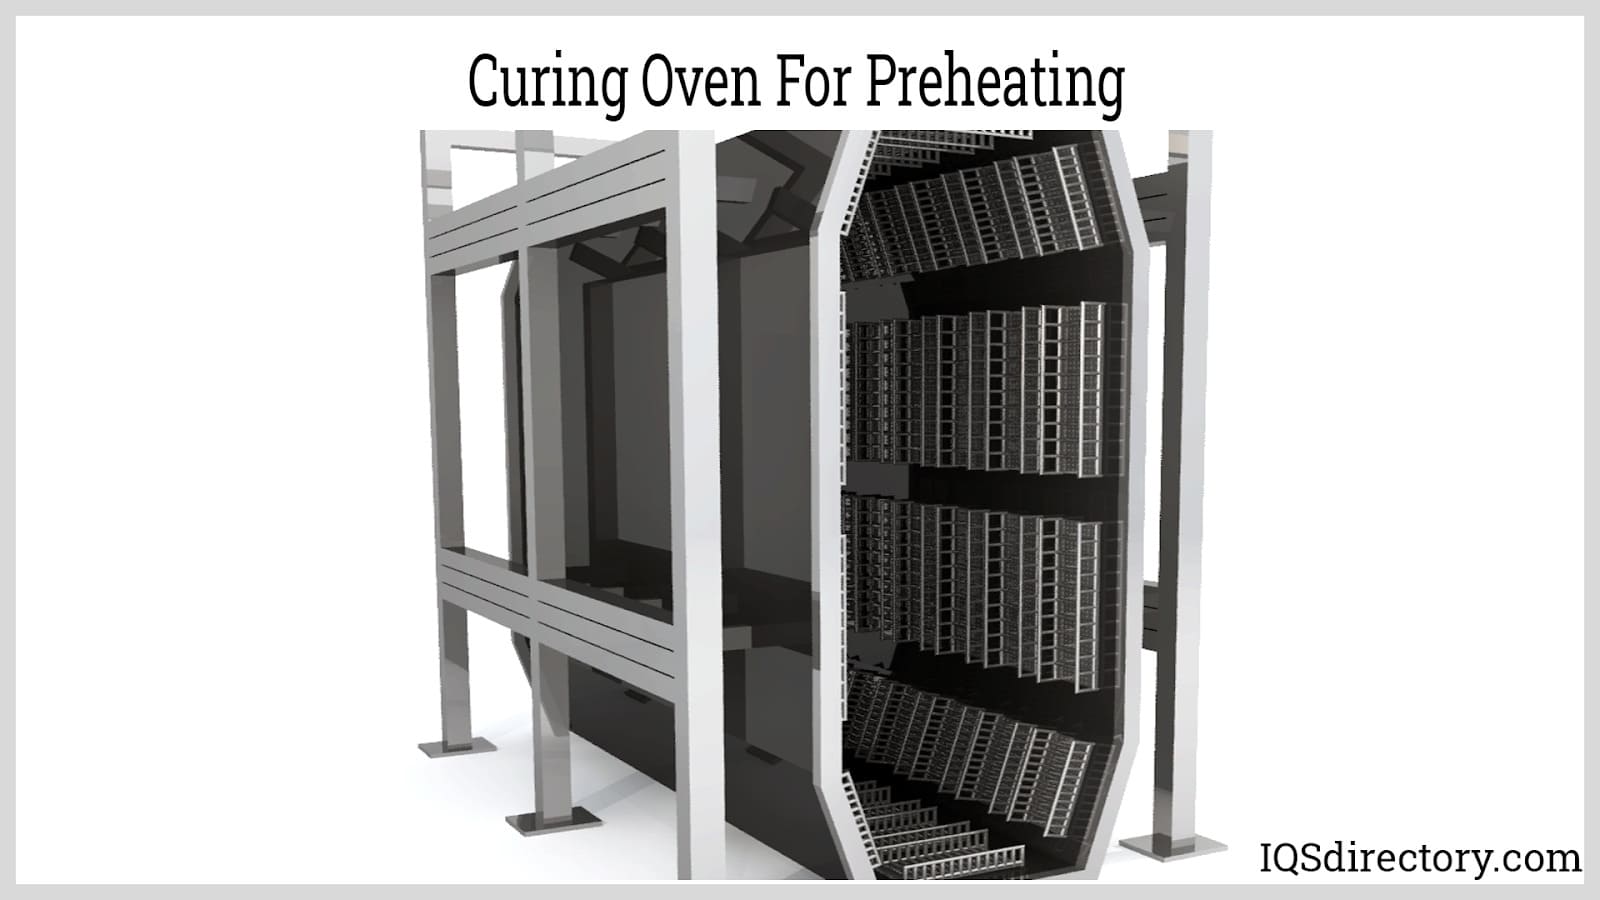 Curing Oven for Preheating